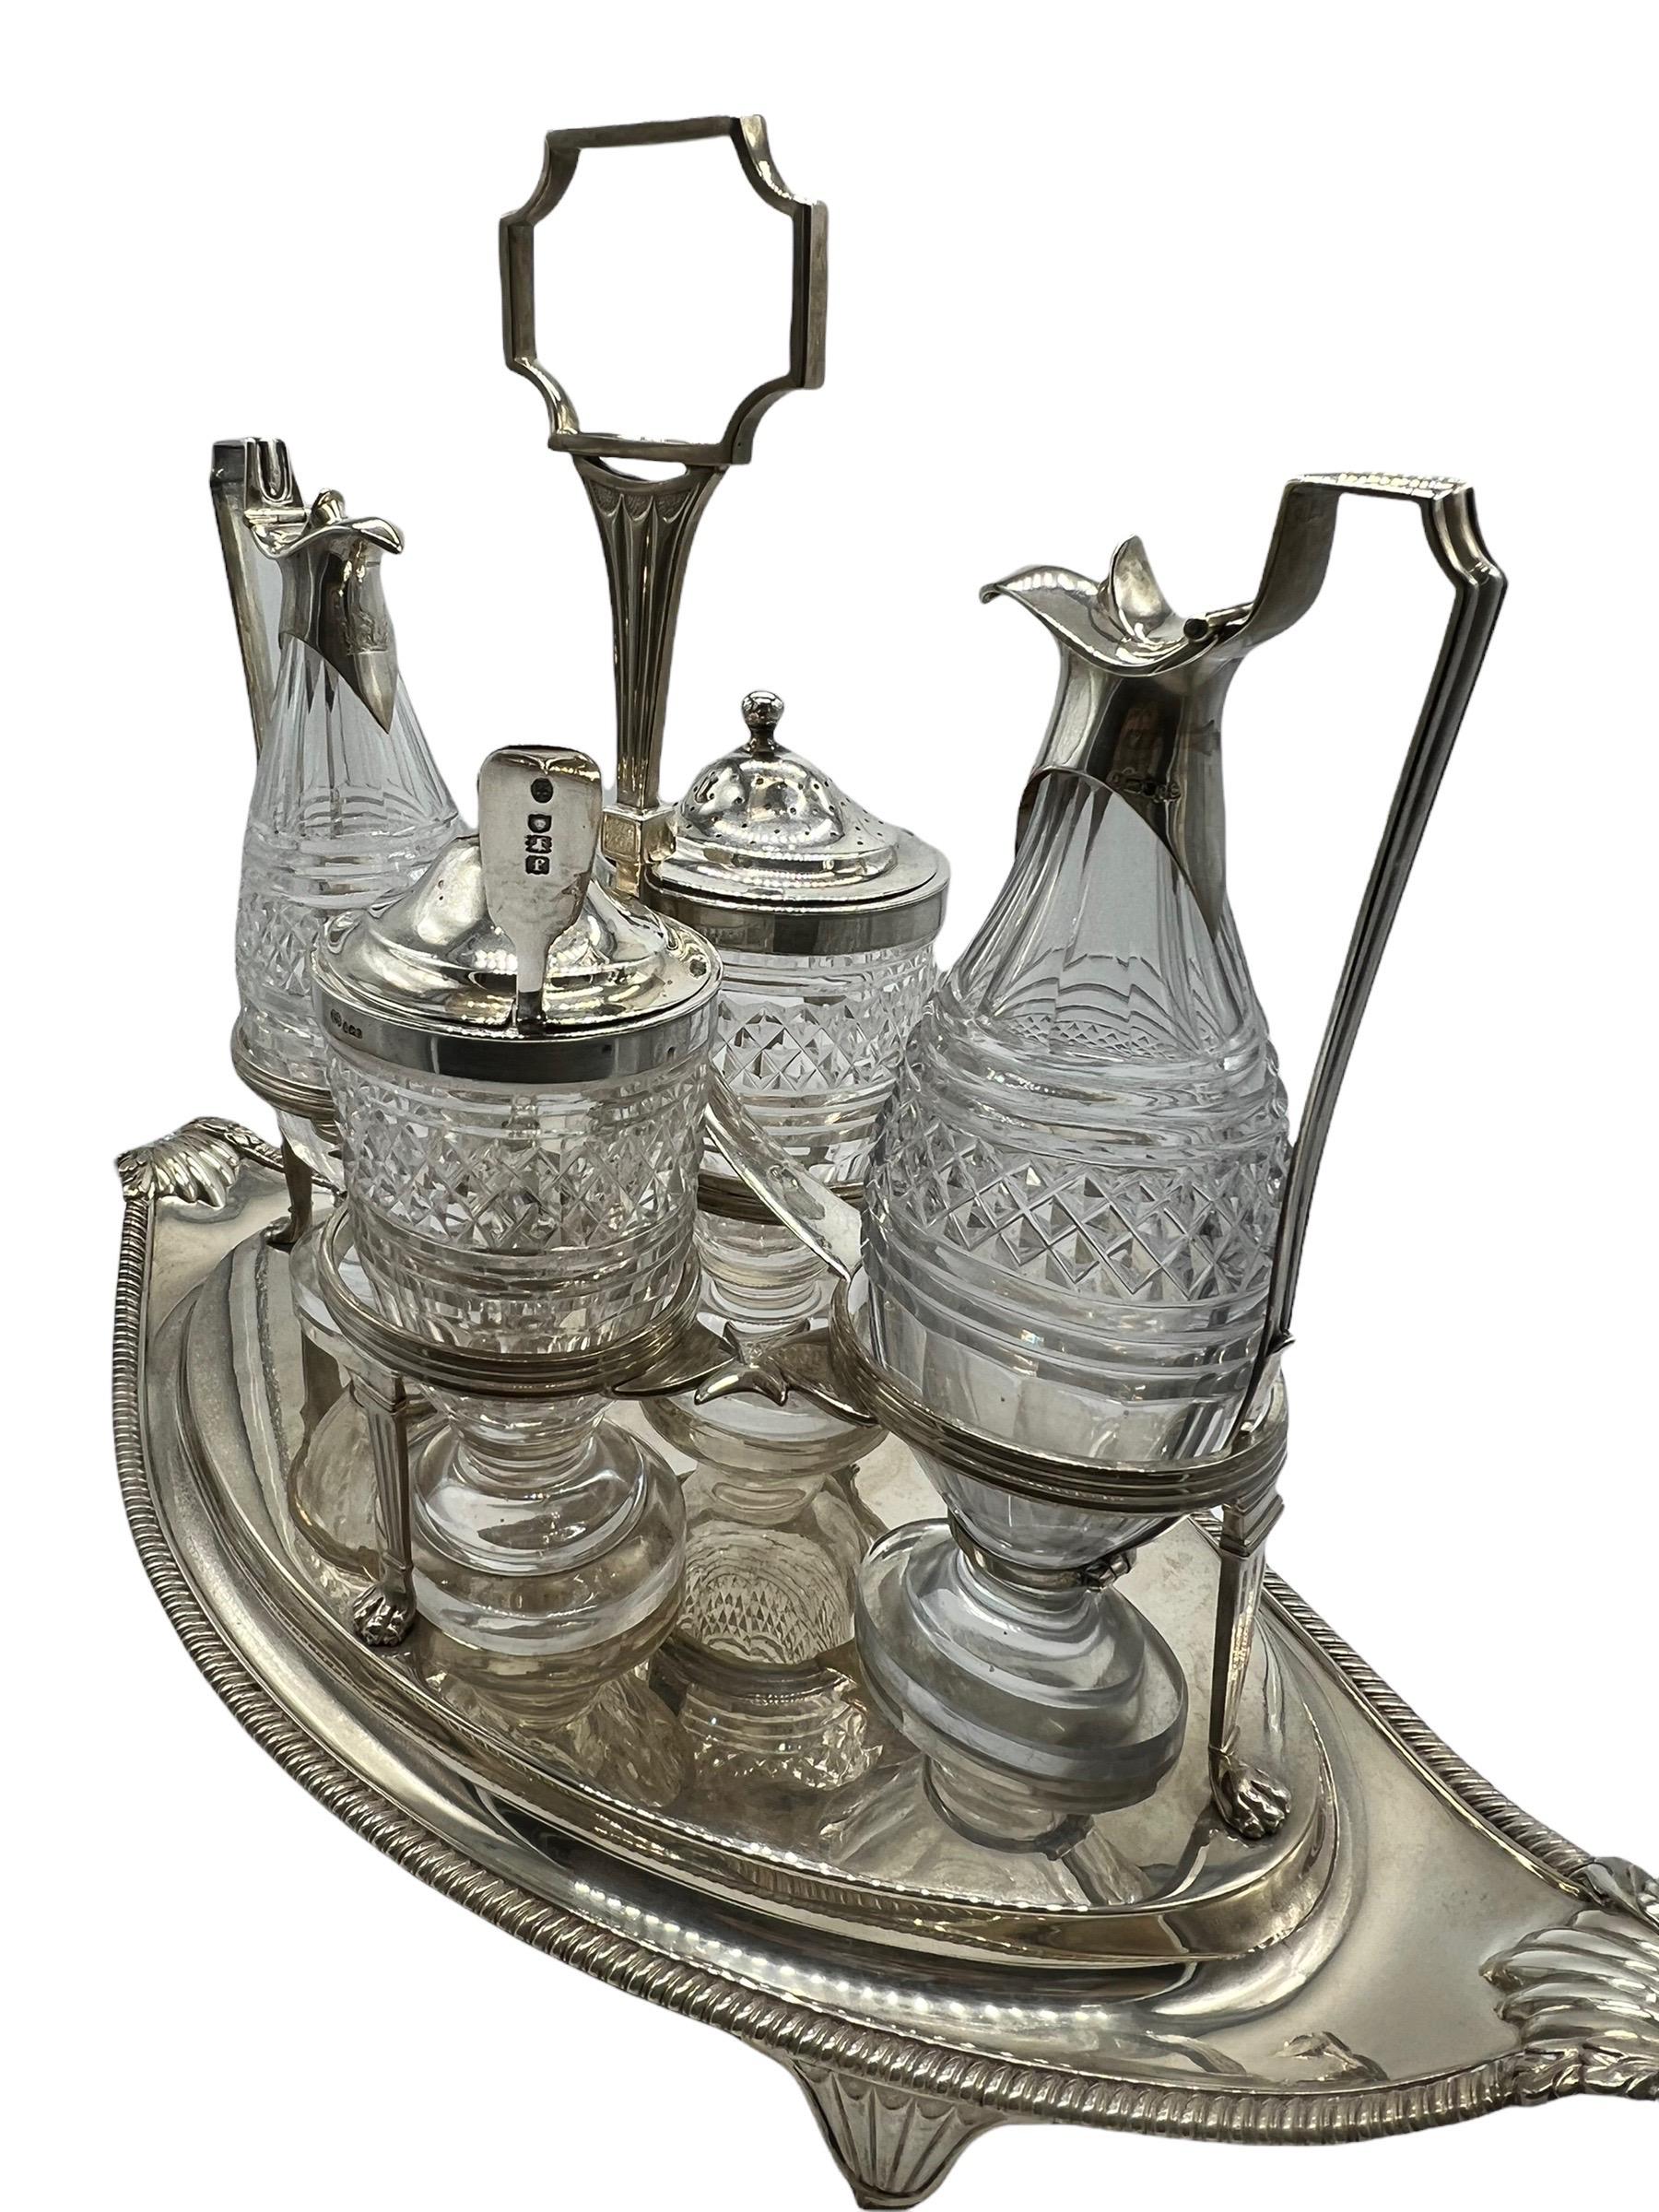 Neoclassical Sterling Silver and Cut-Glass Cruet Set by Paul Storr, Early 1800s